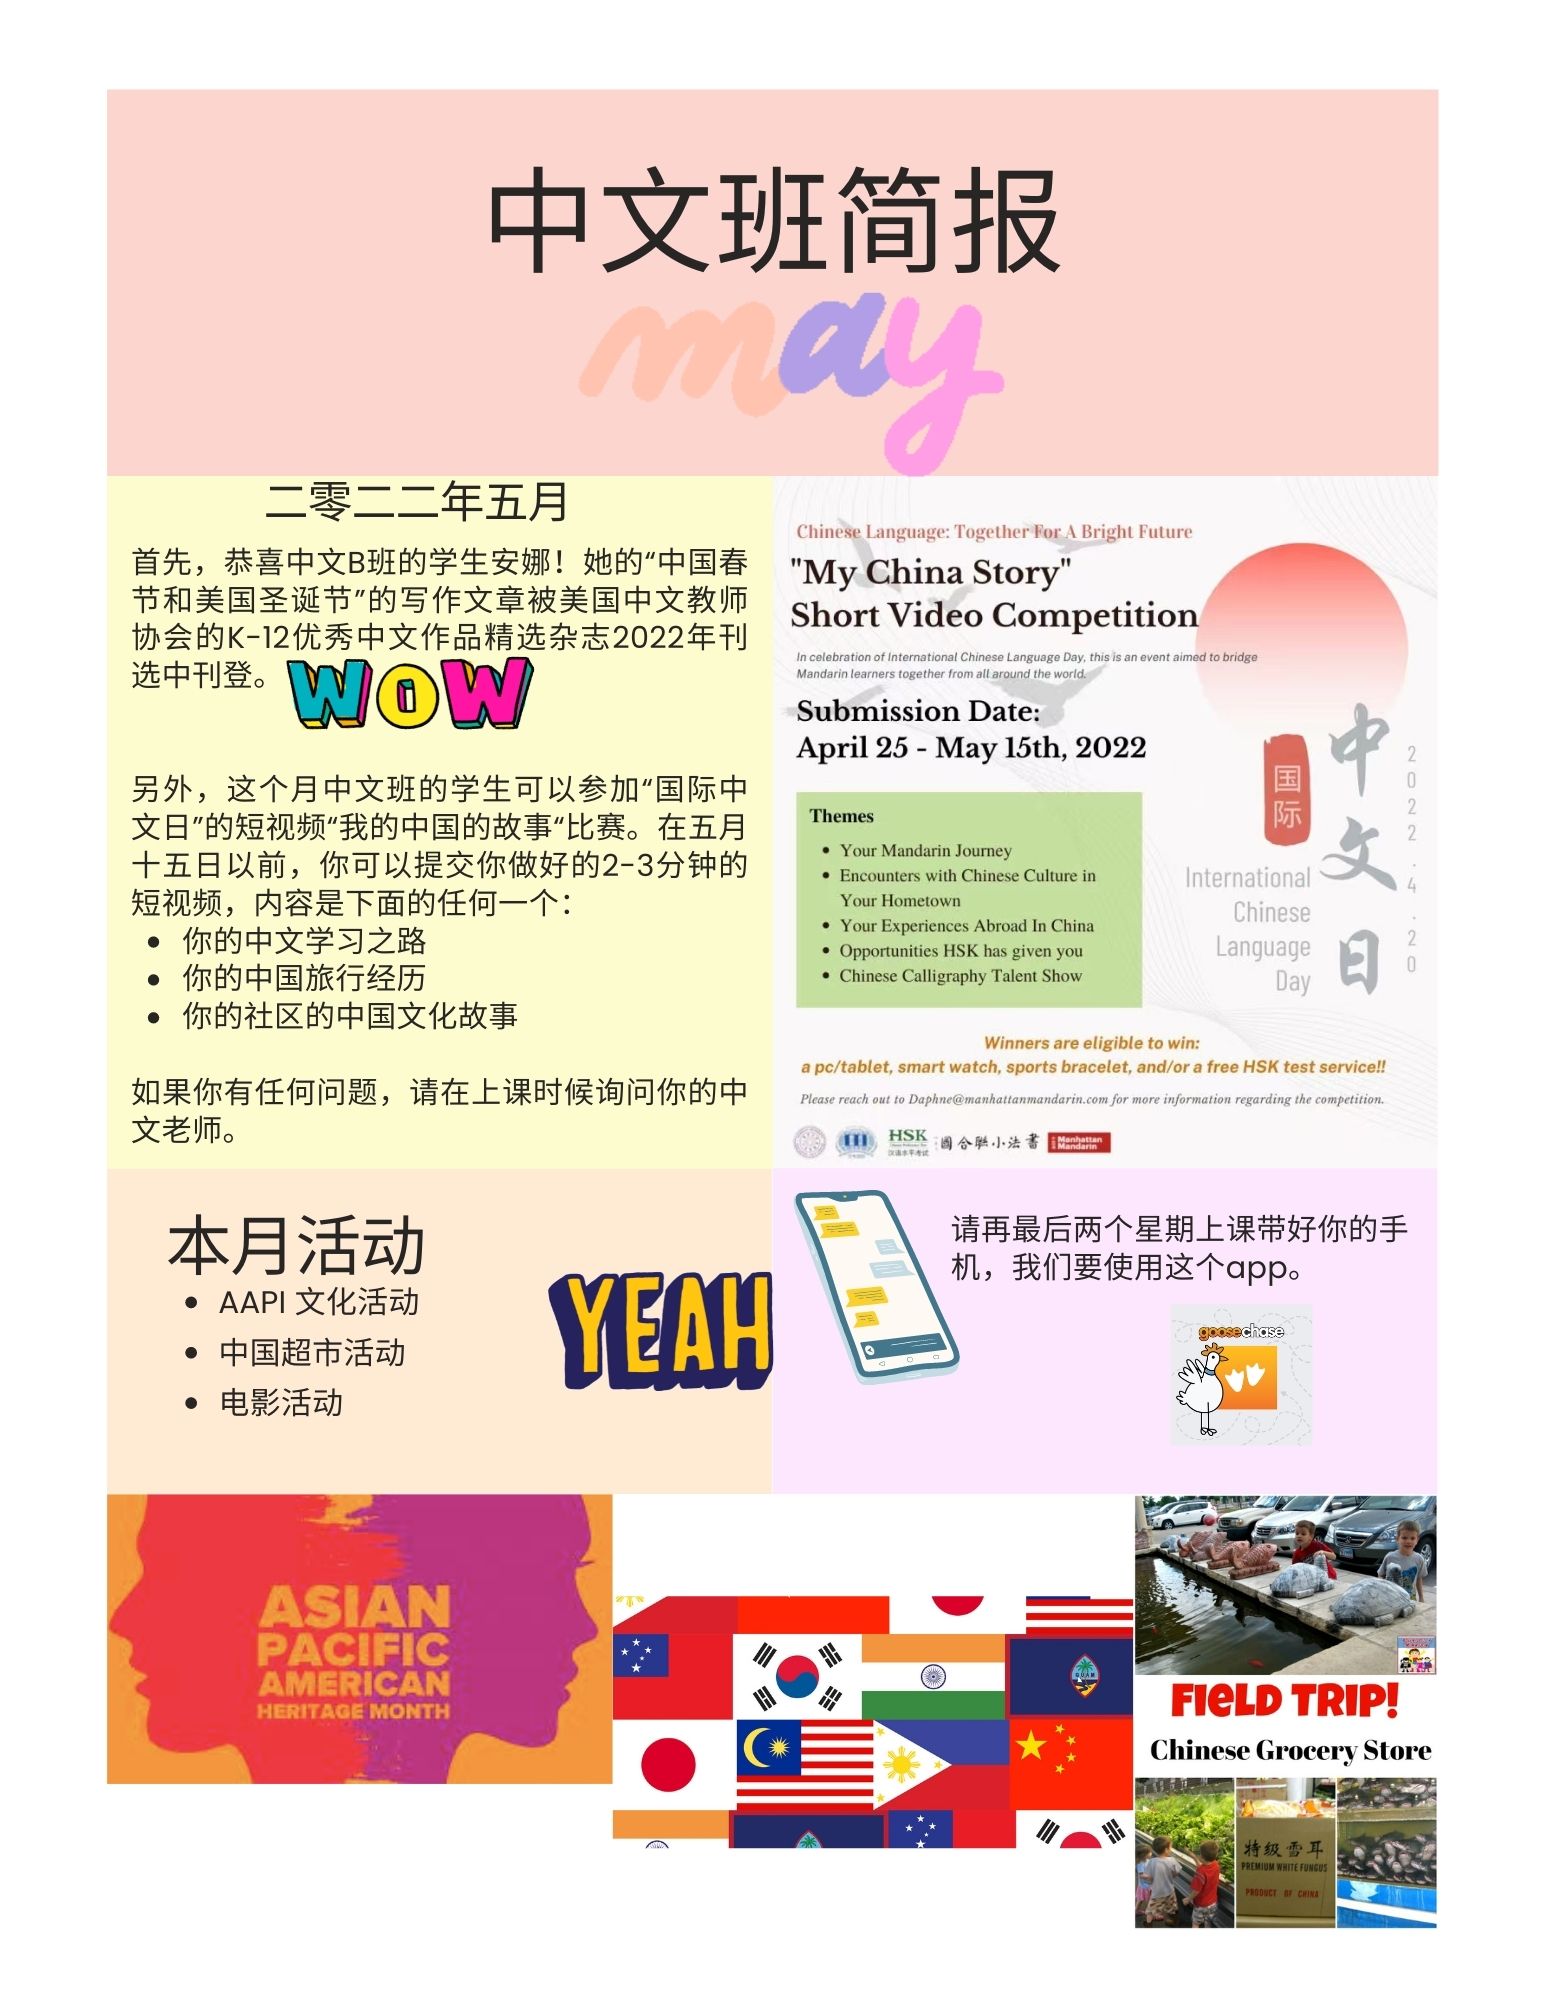 Picture 5 – A sample class-made Canva newsletter - has various news stories in Chinese, says "may", has info about a field trip and a short video competition and Asian Pacific American heritage month